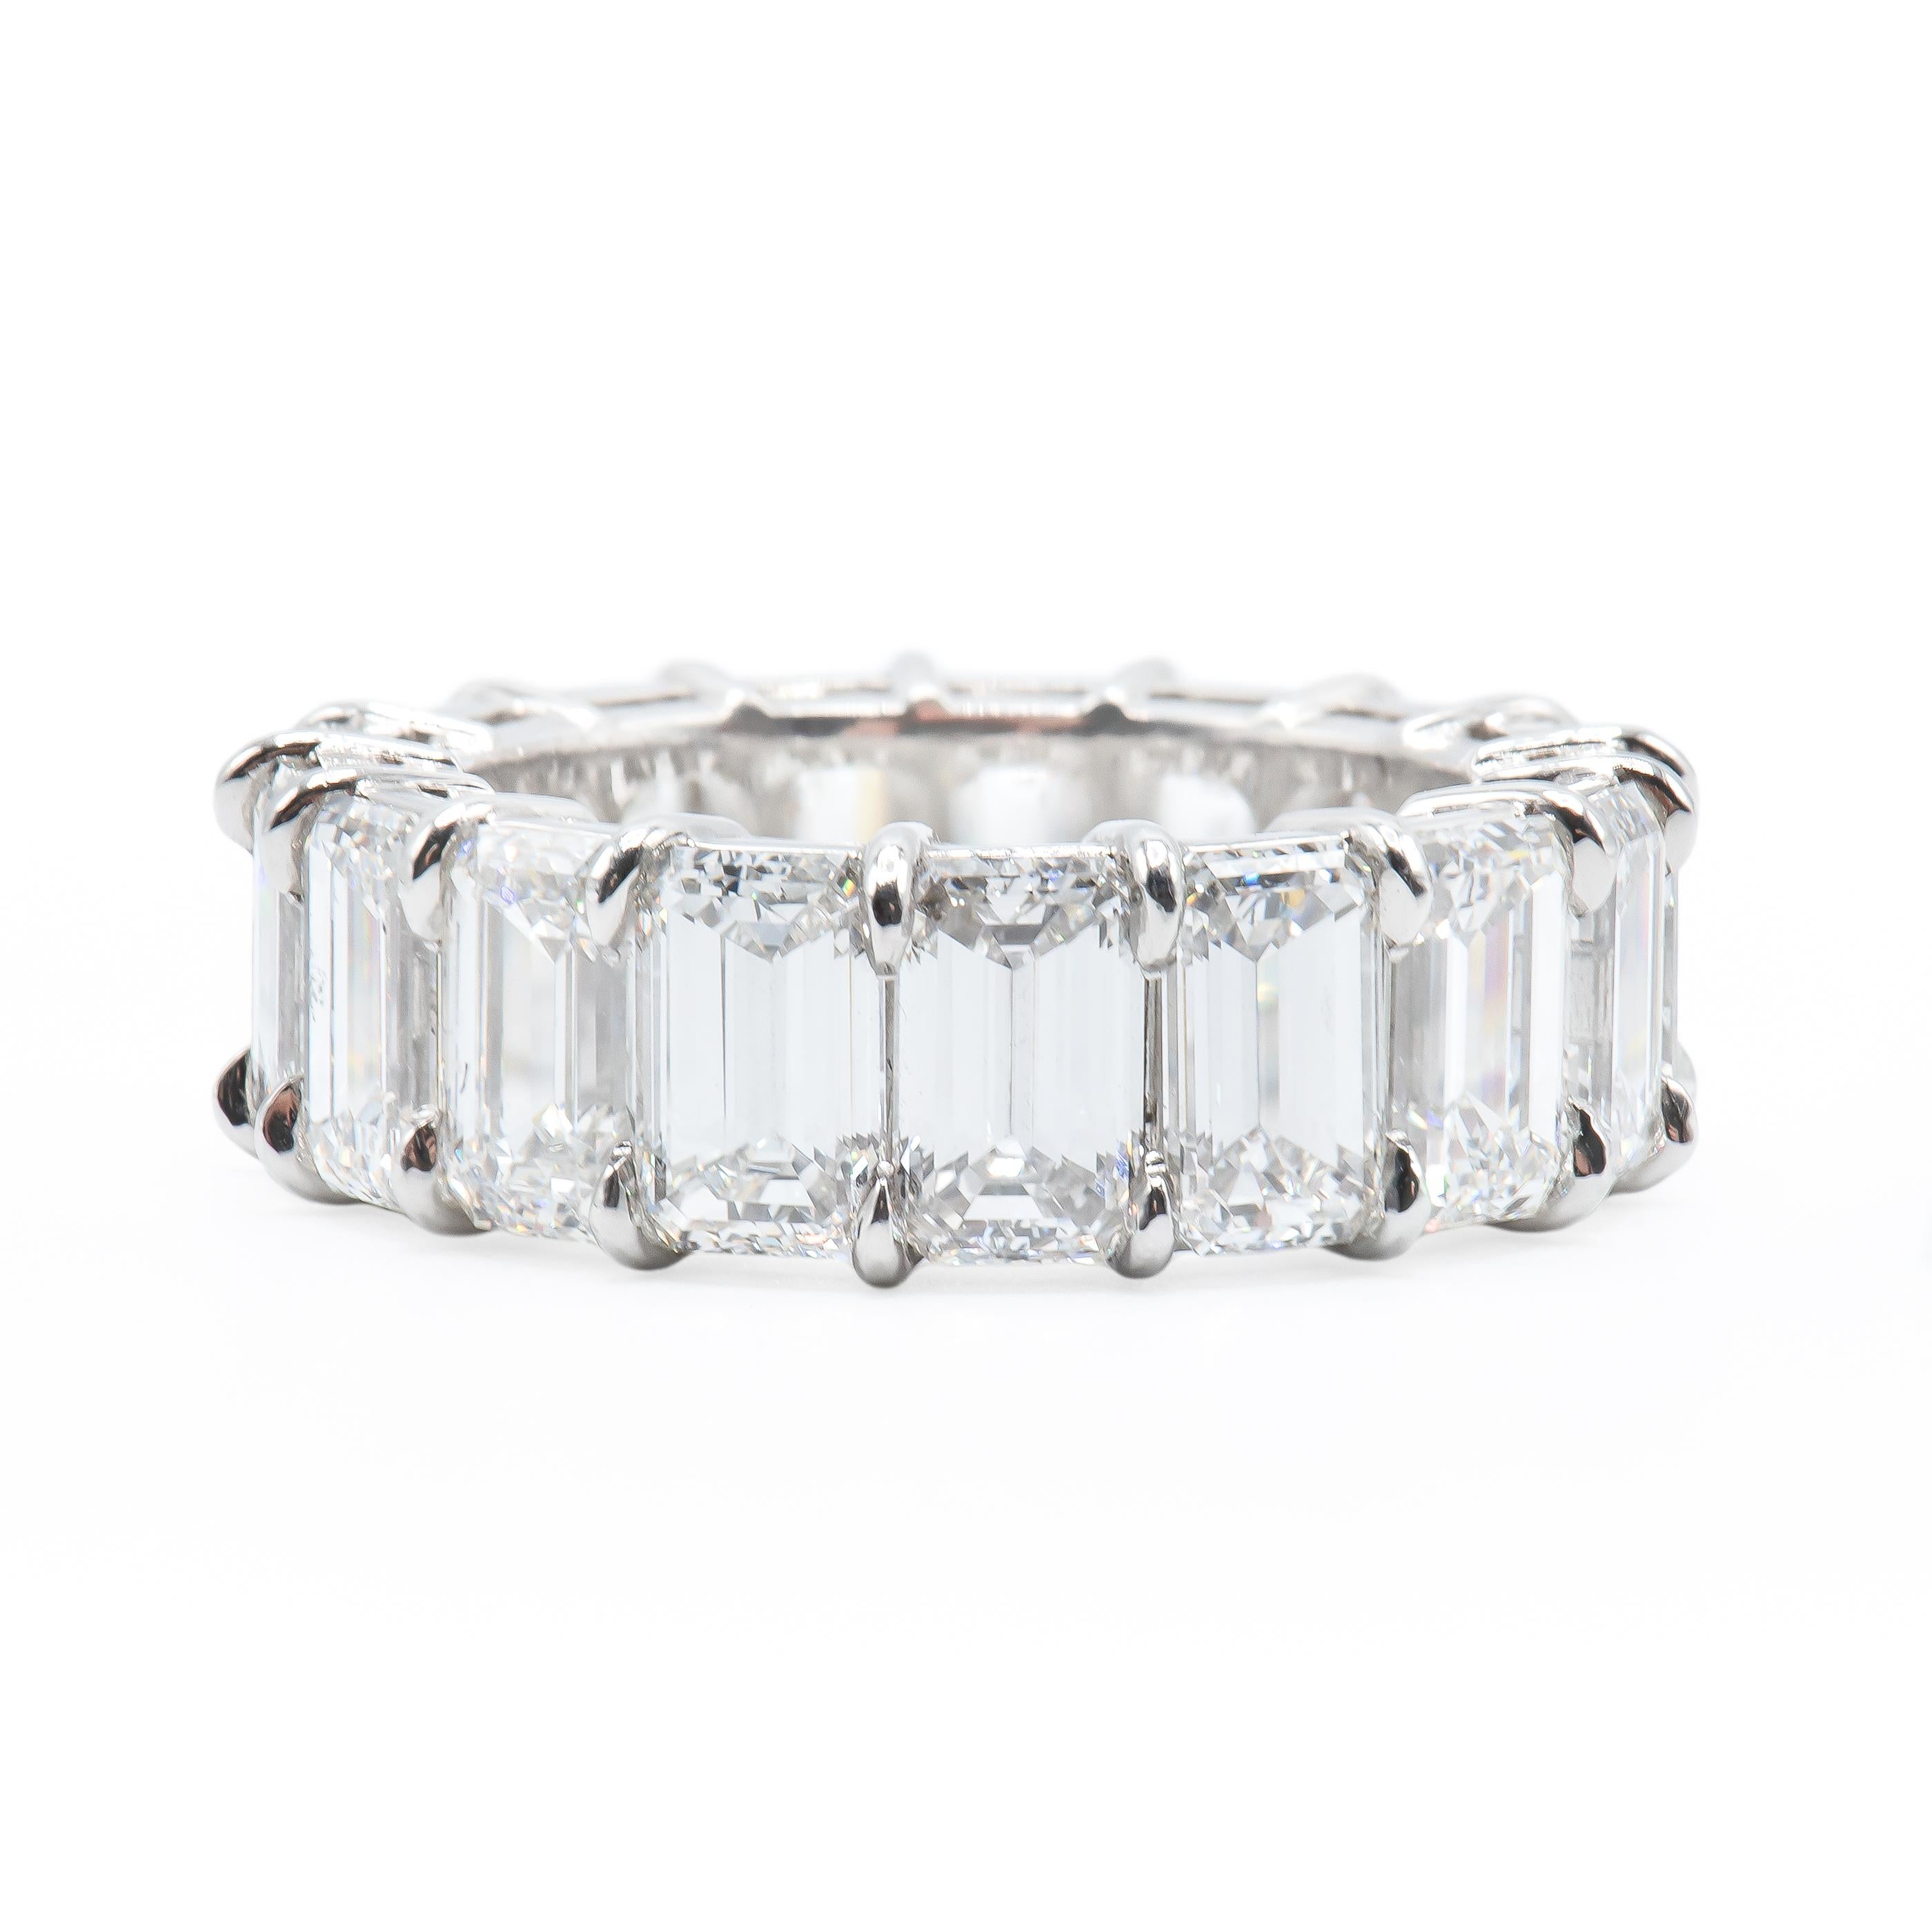 Classic Emerald Cut Diamond Eternity Band featuring 17 Stones weighing a Total of 9.75 Carats. Average is 58 Points each.
Diamonds are of GH color and VS Clarity.
Set in Platinum.
Size 6.5